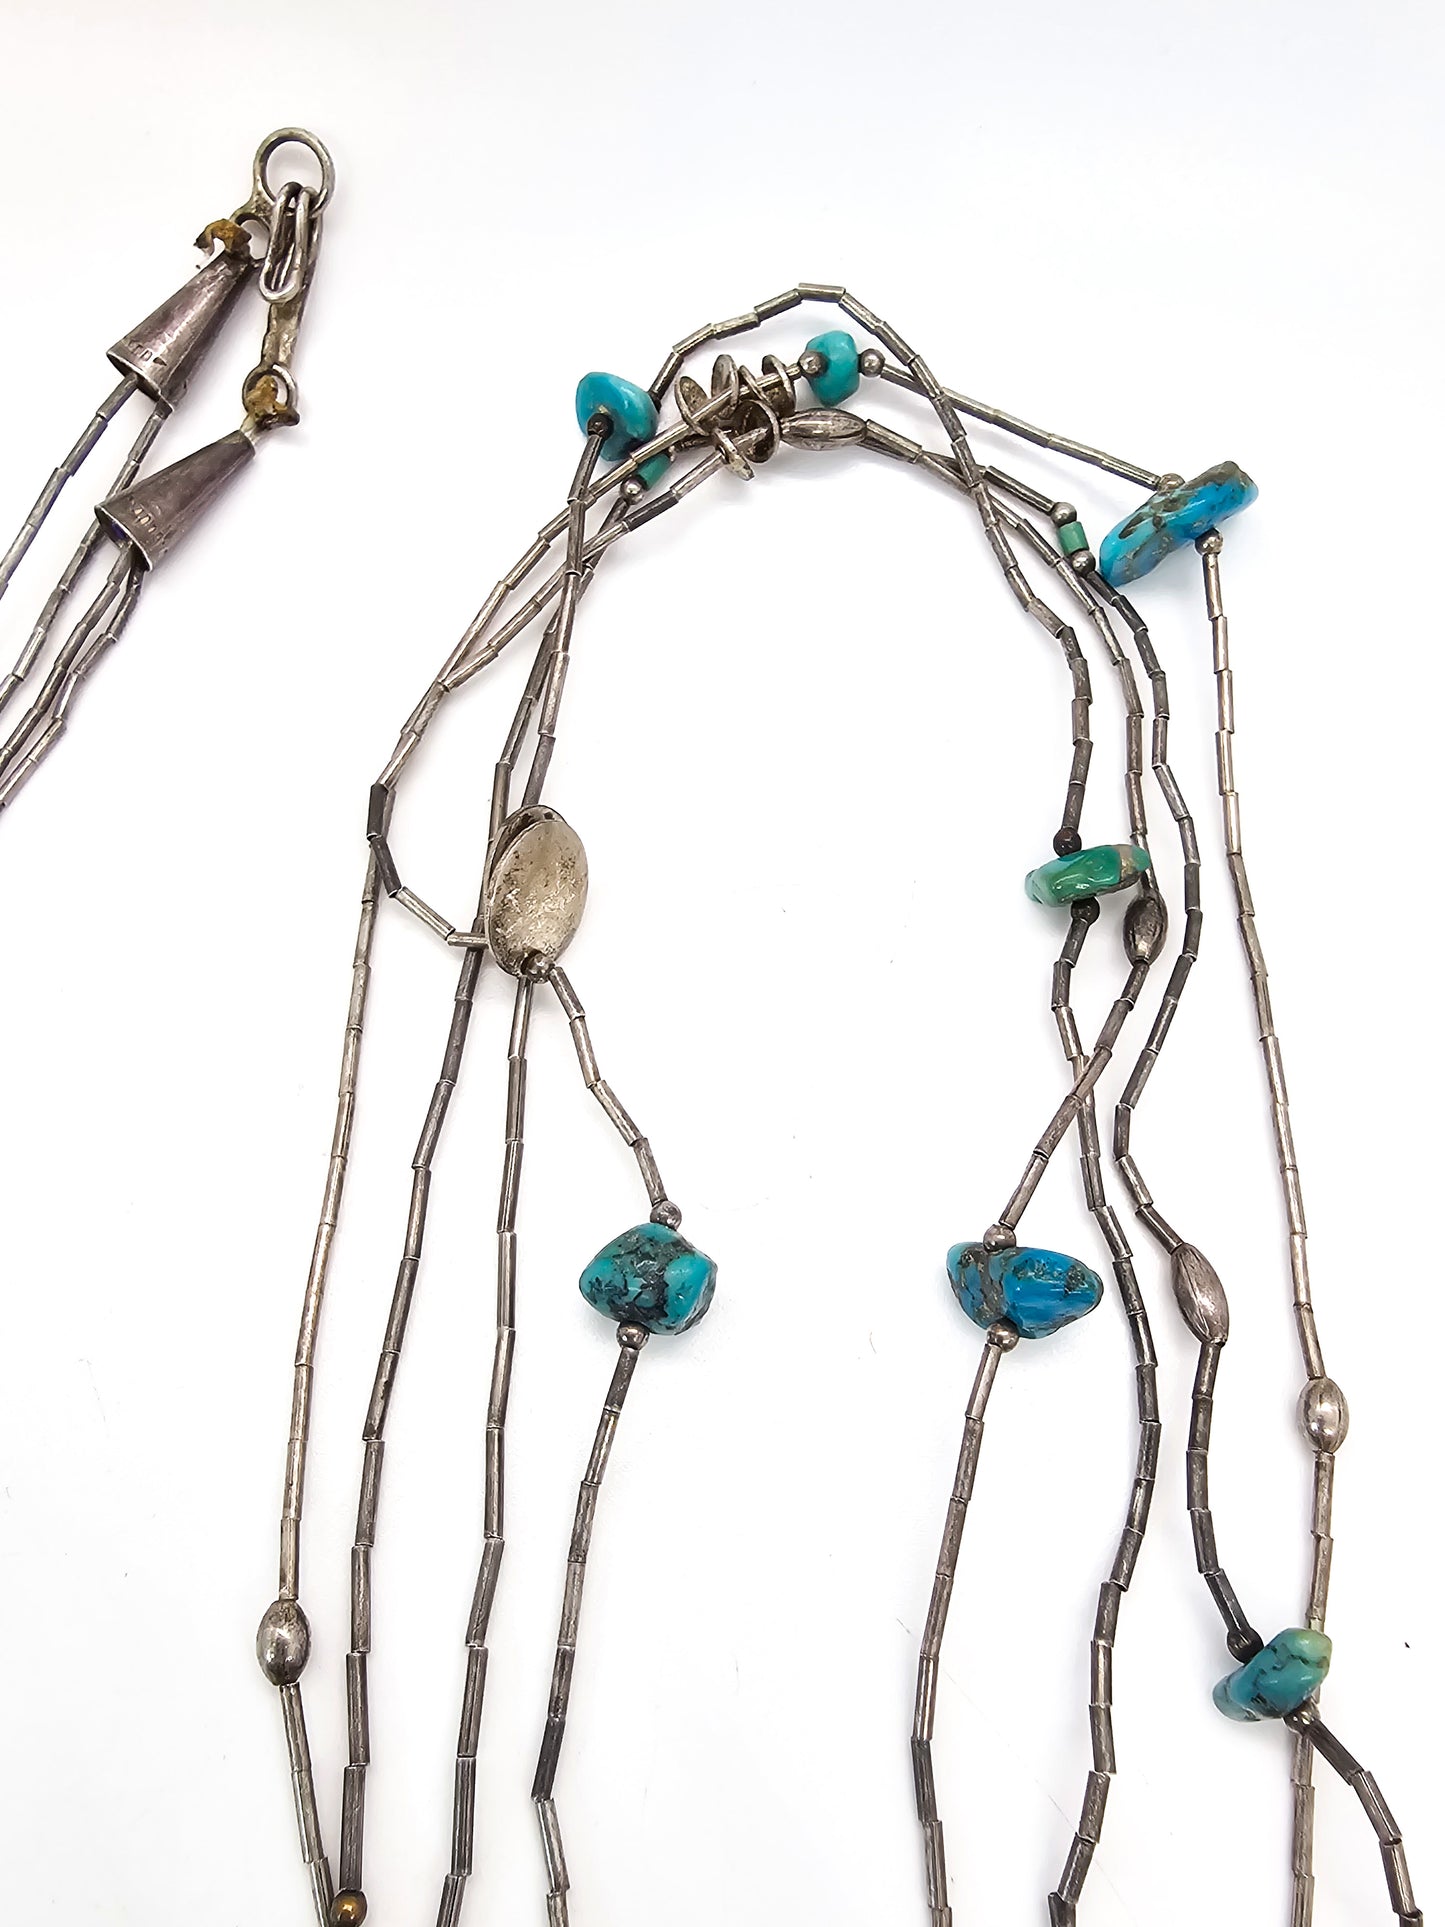 Fetish Heishi turquoise nugget Native American Liquid silver graduated vintage necklace